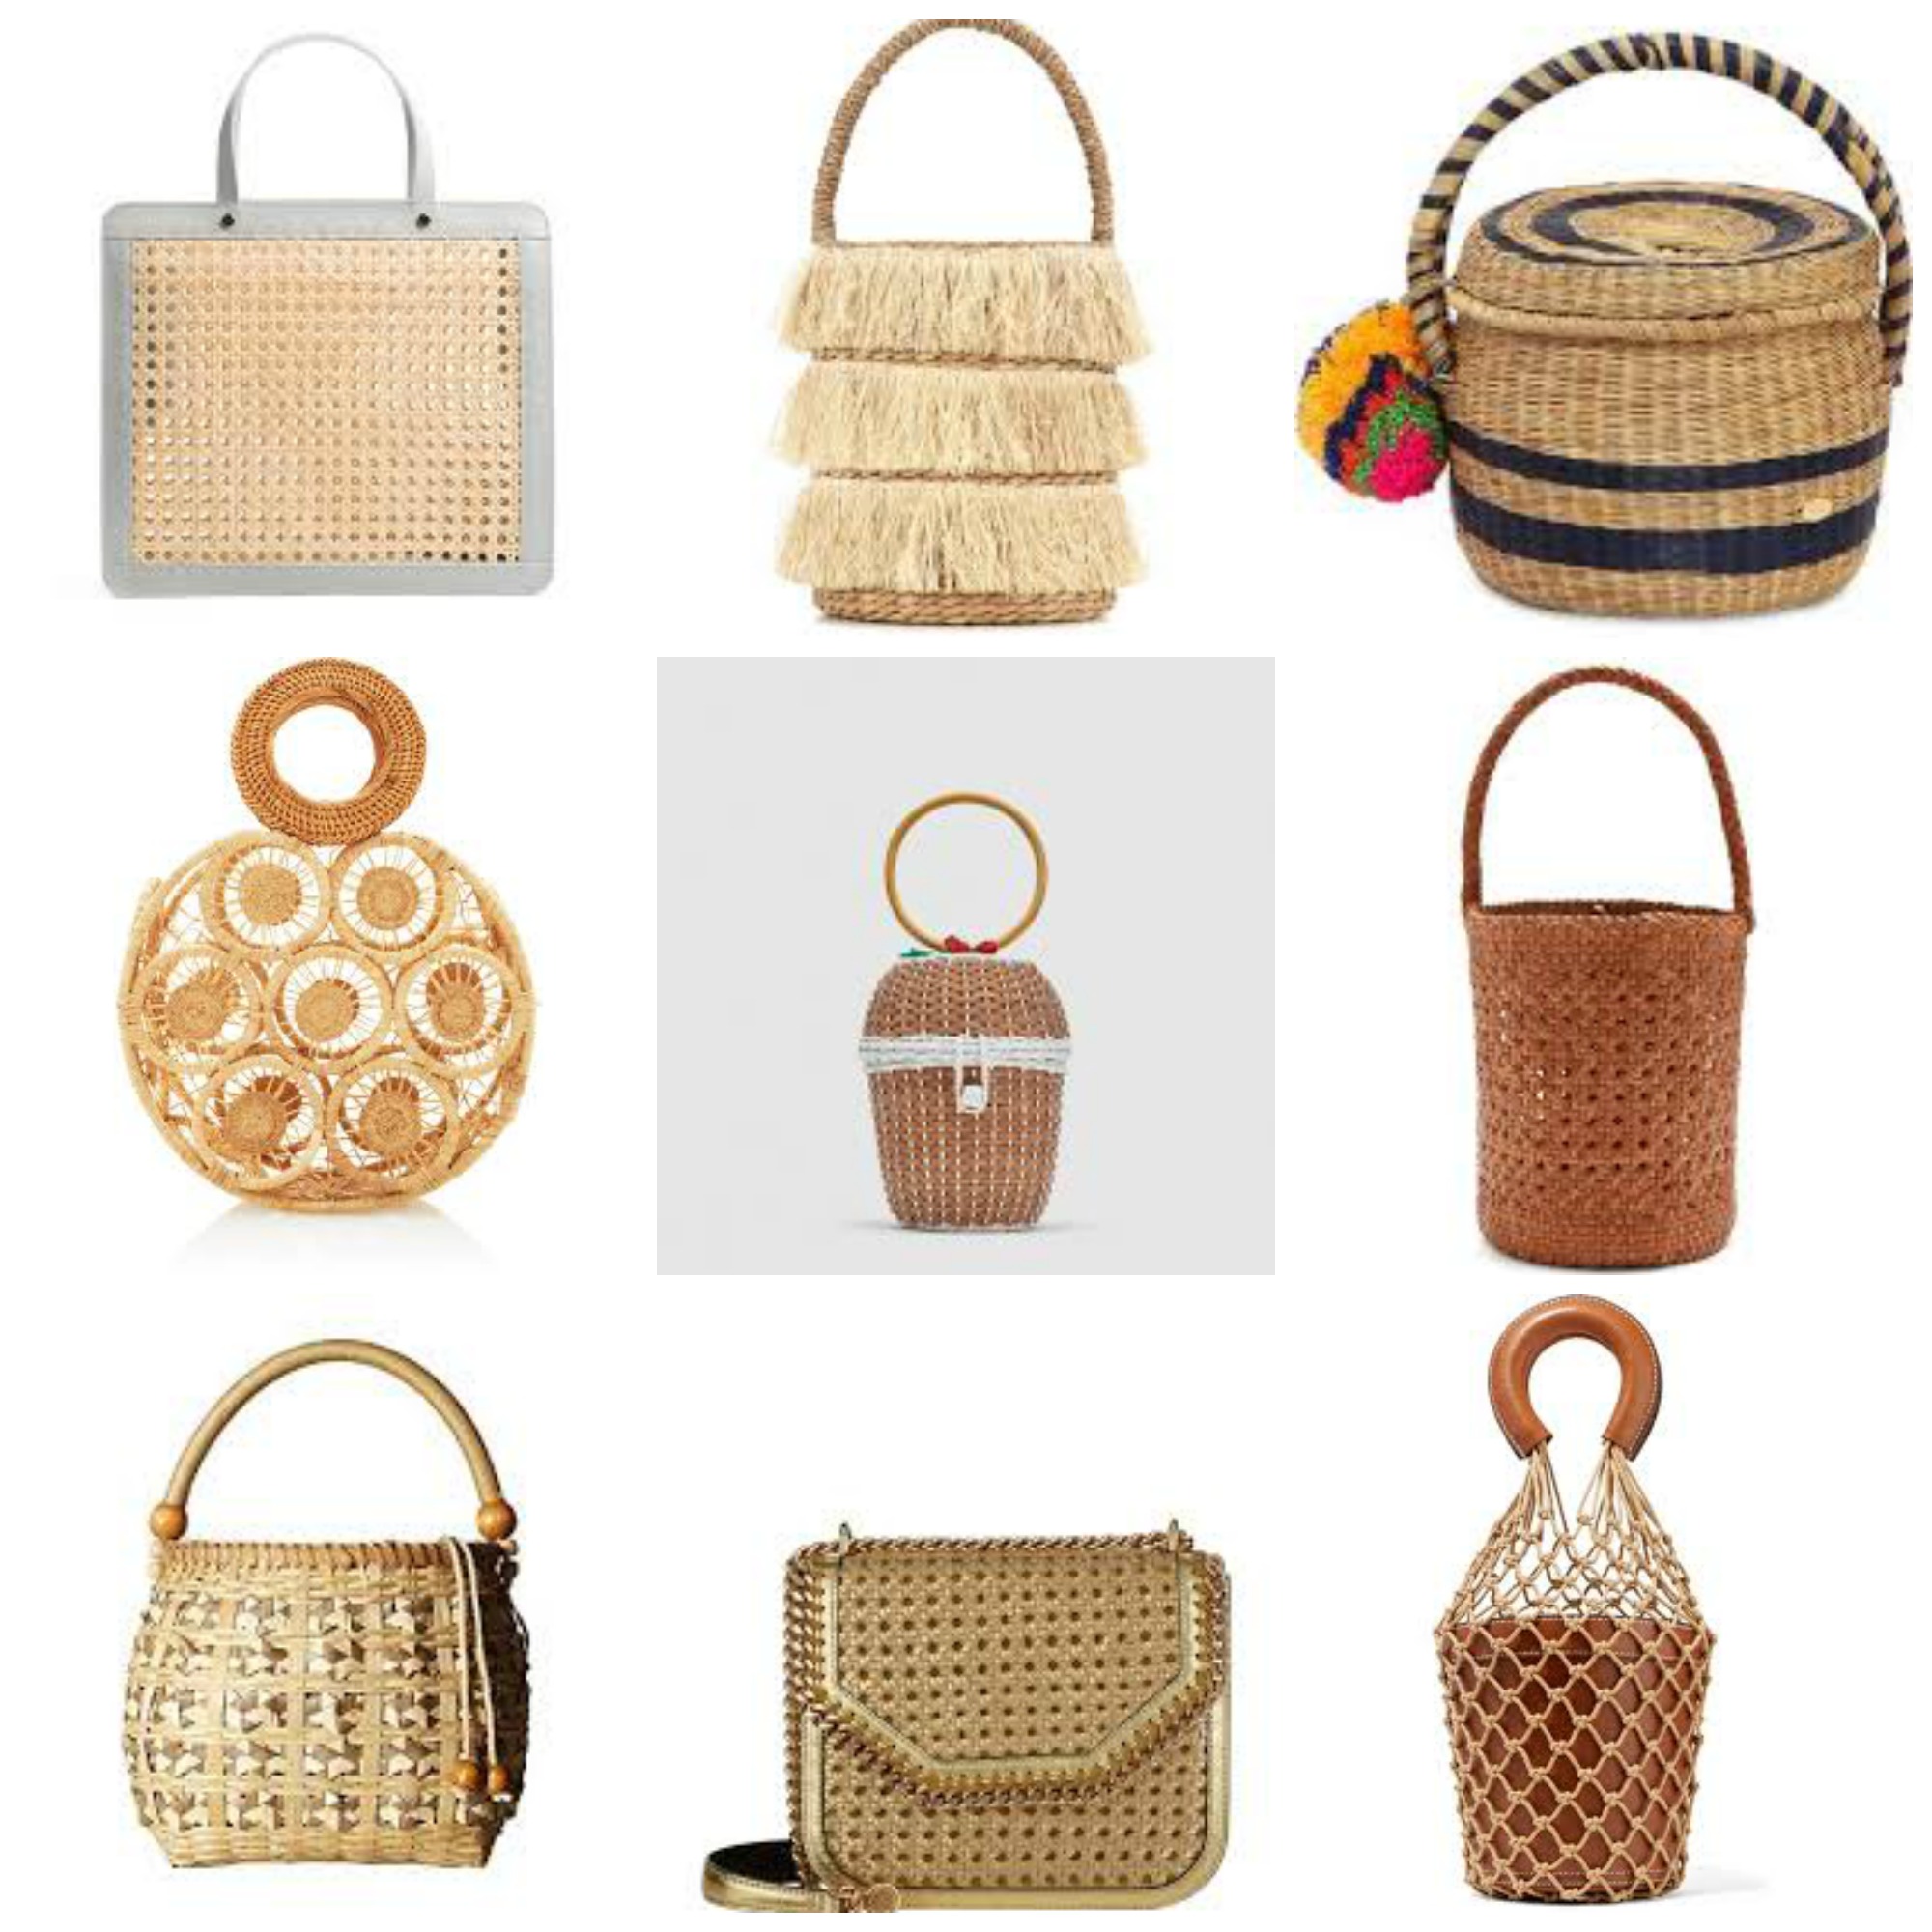 Bag Obsession- Woven Bags - Strolling the City in Heels